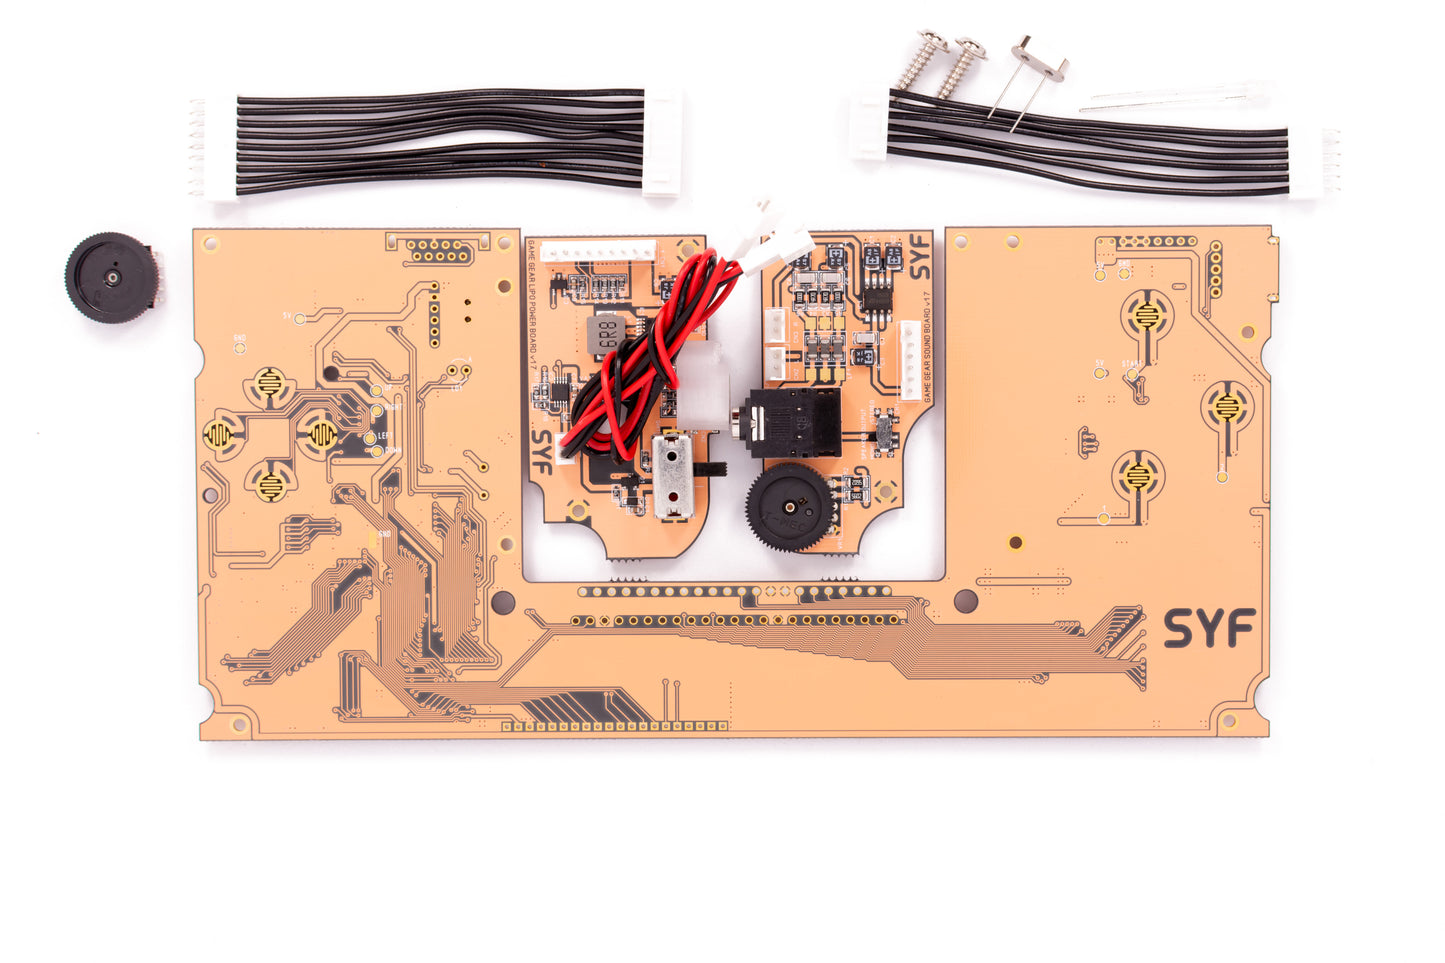 Game Gear Mainboard 315-5378 v1.2 - 3-in-1 kit